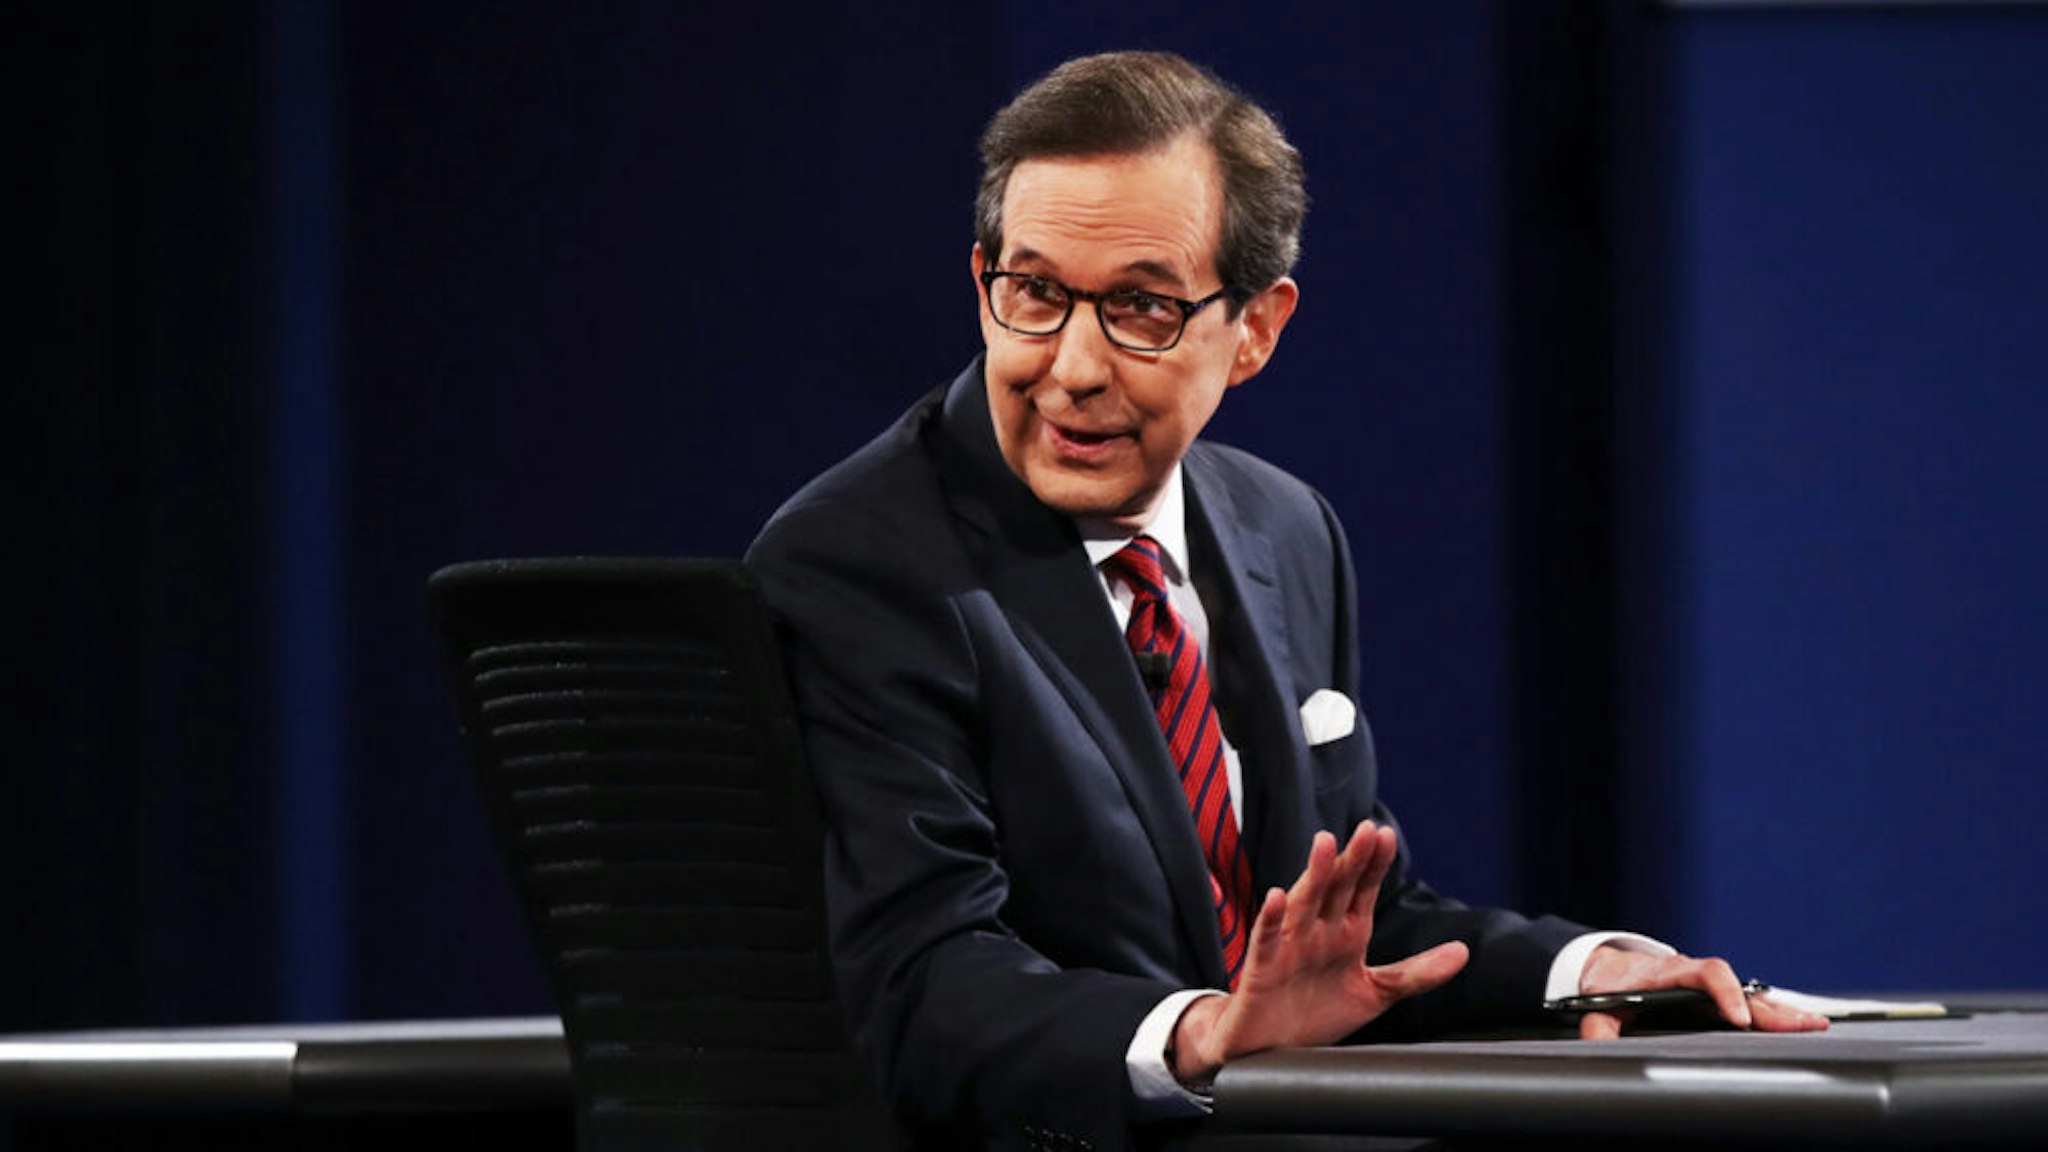 Fox News anchor and moderator Chris Wallace speaks to the guests and attendees during the third U.S. presidential debate at the Thomas & Mack Center on October 19, 2016 in Las Vegas, Nevada.